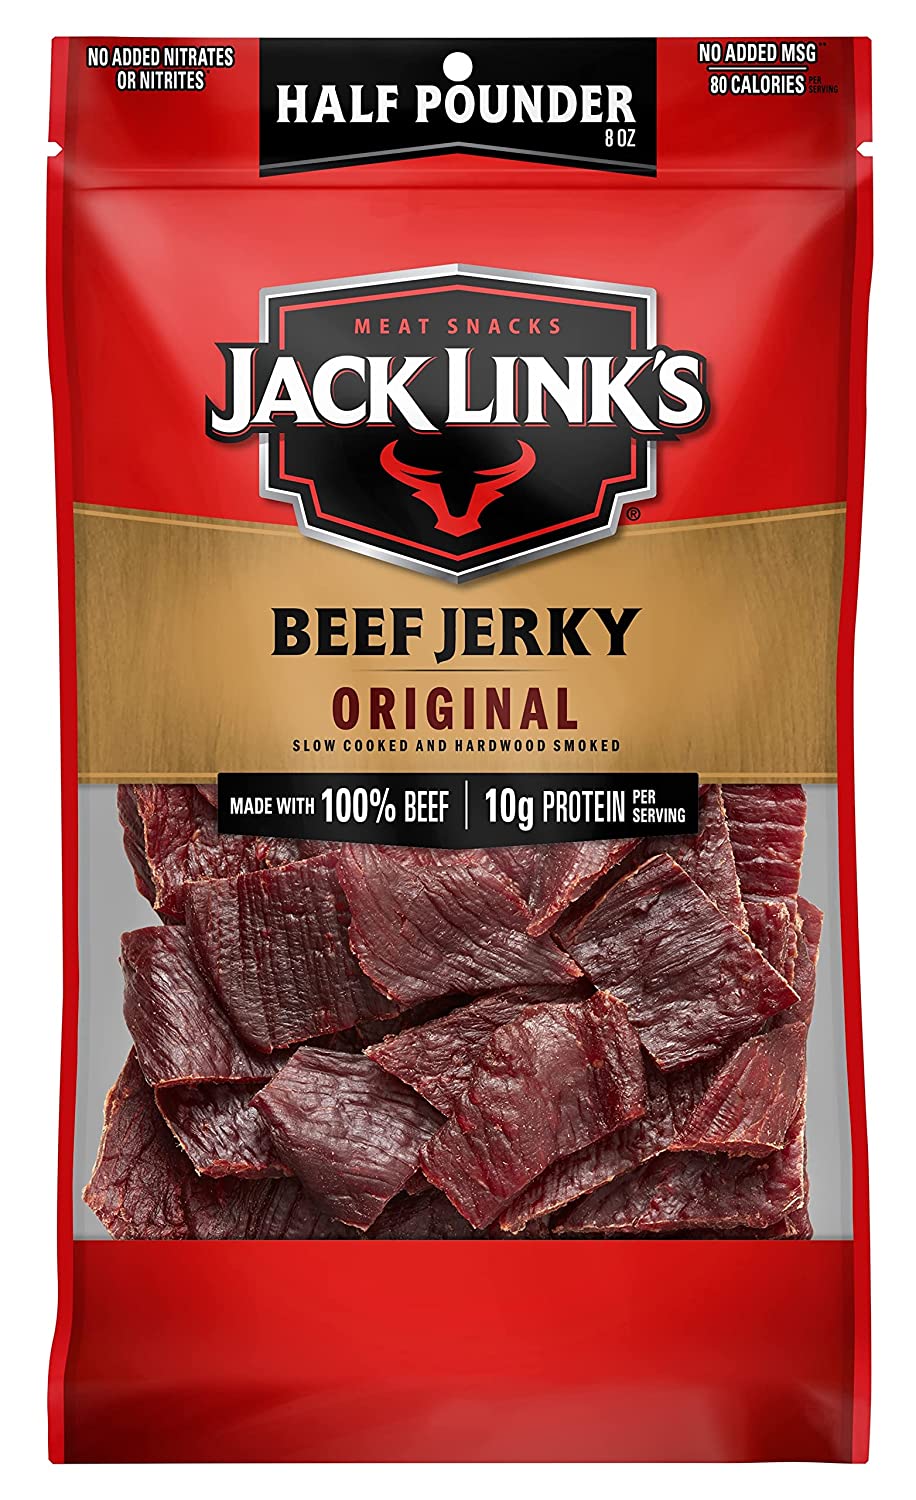 20-Count 0.625-Oz Jack Link's Beef Jerky (Original) $12.47 & More w/ S&S + Free Shipping w/ Prime or $25+